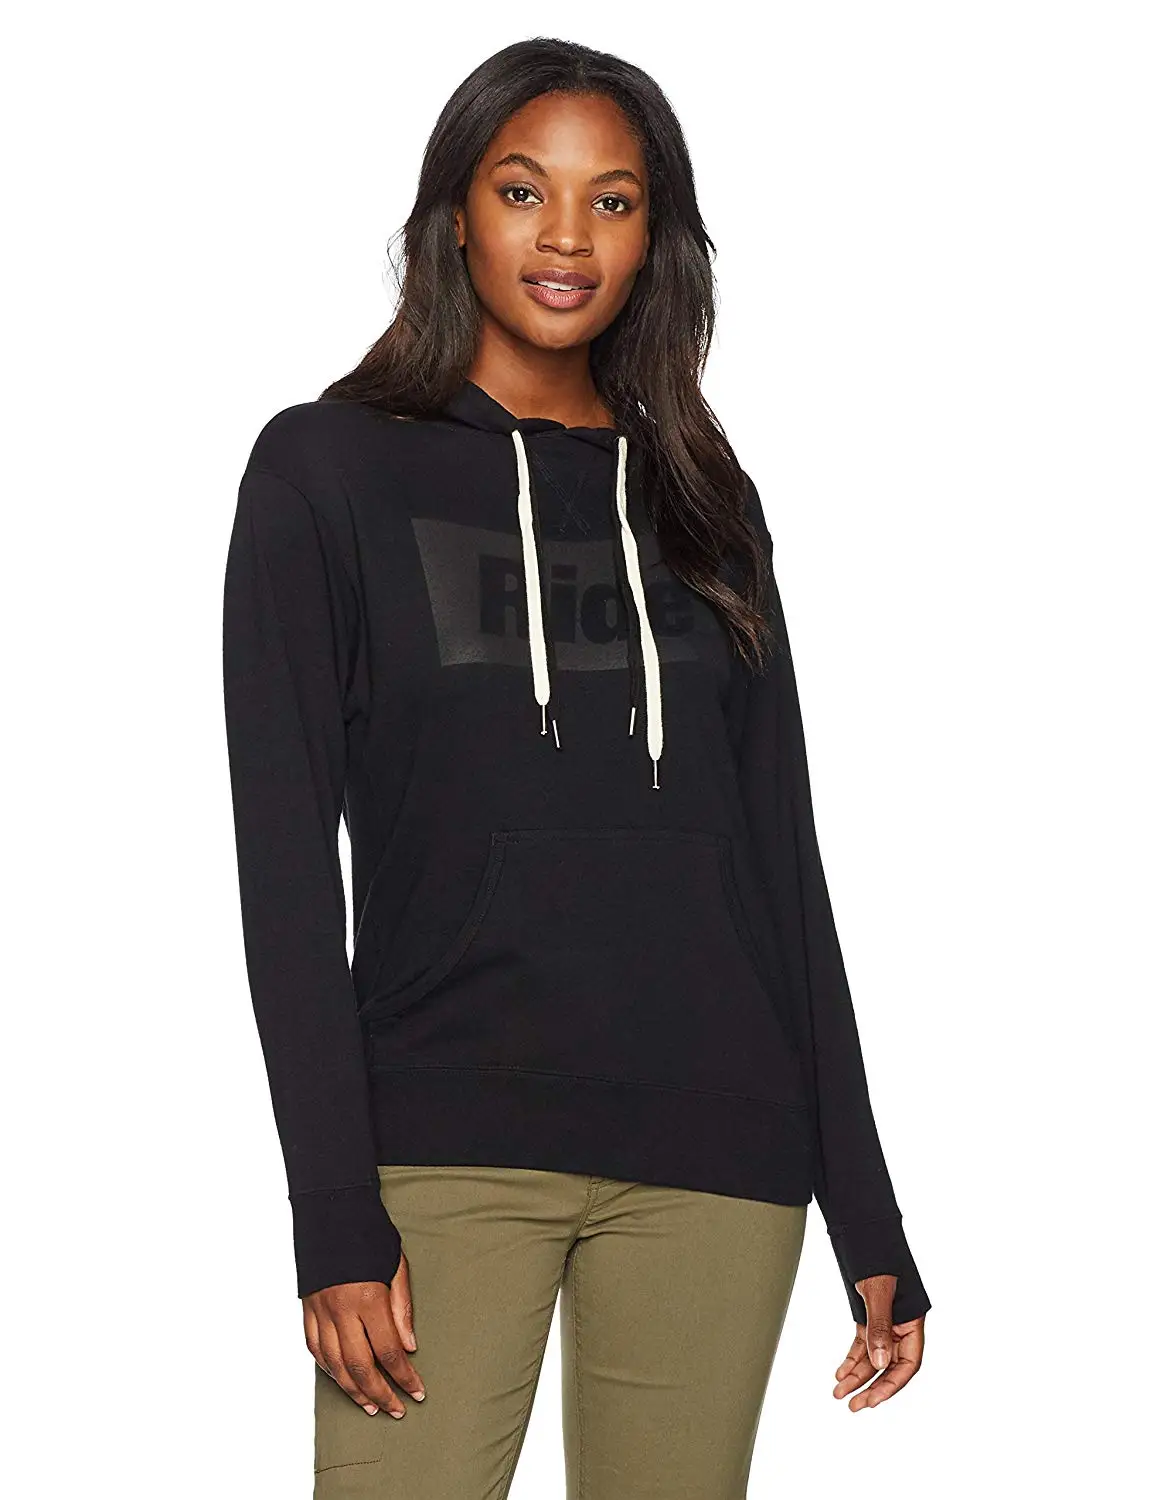 Cheap Bar Hoodie, find Bar Hoodie deals on line at Alibaba.com